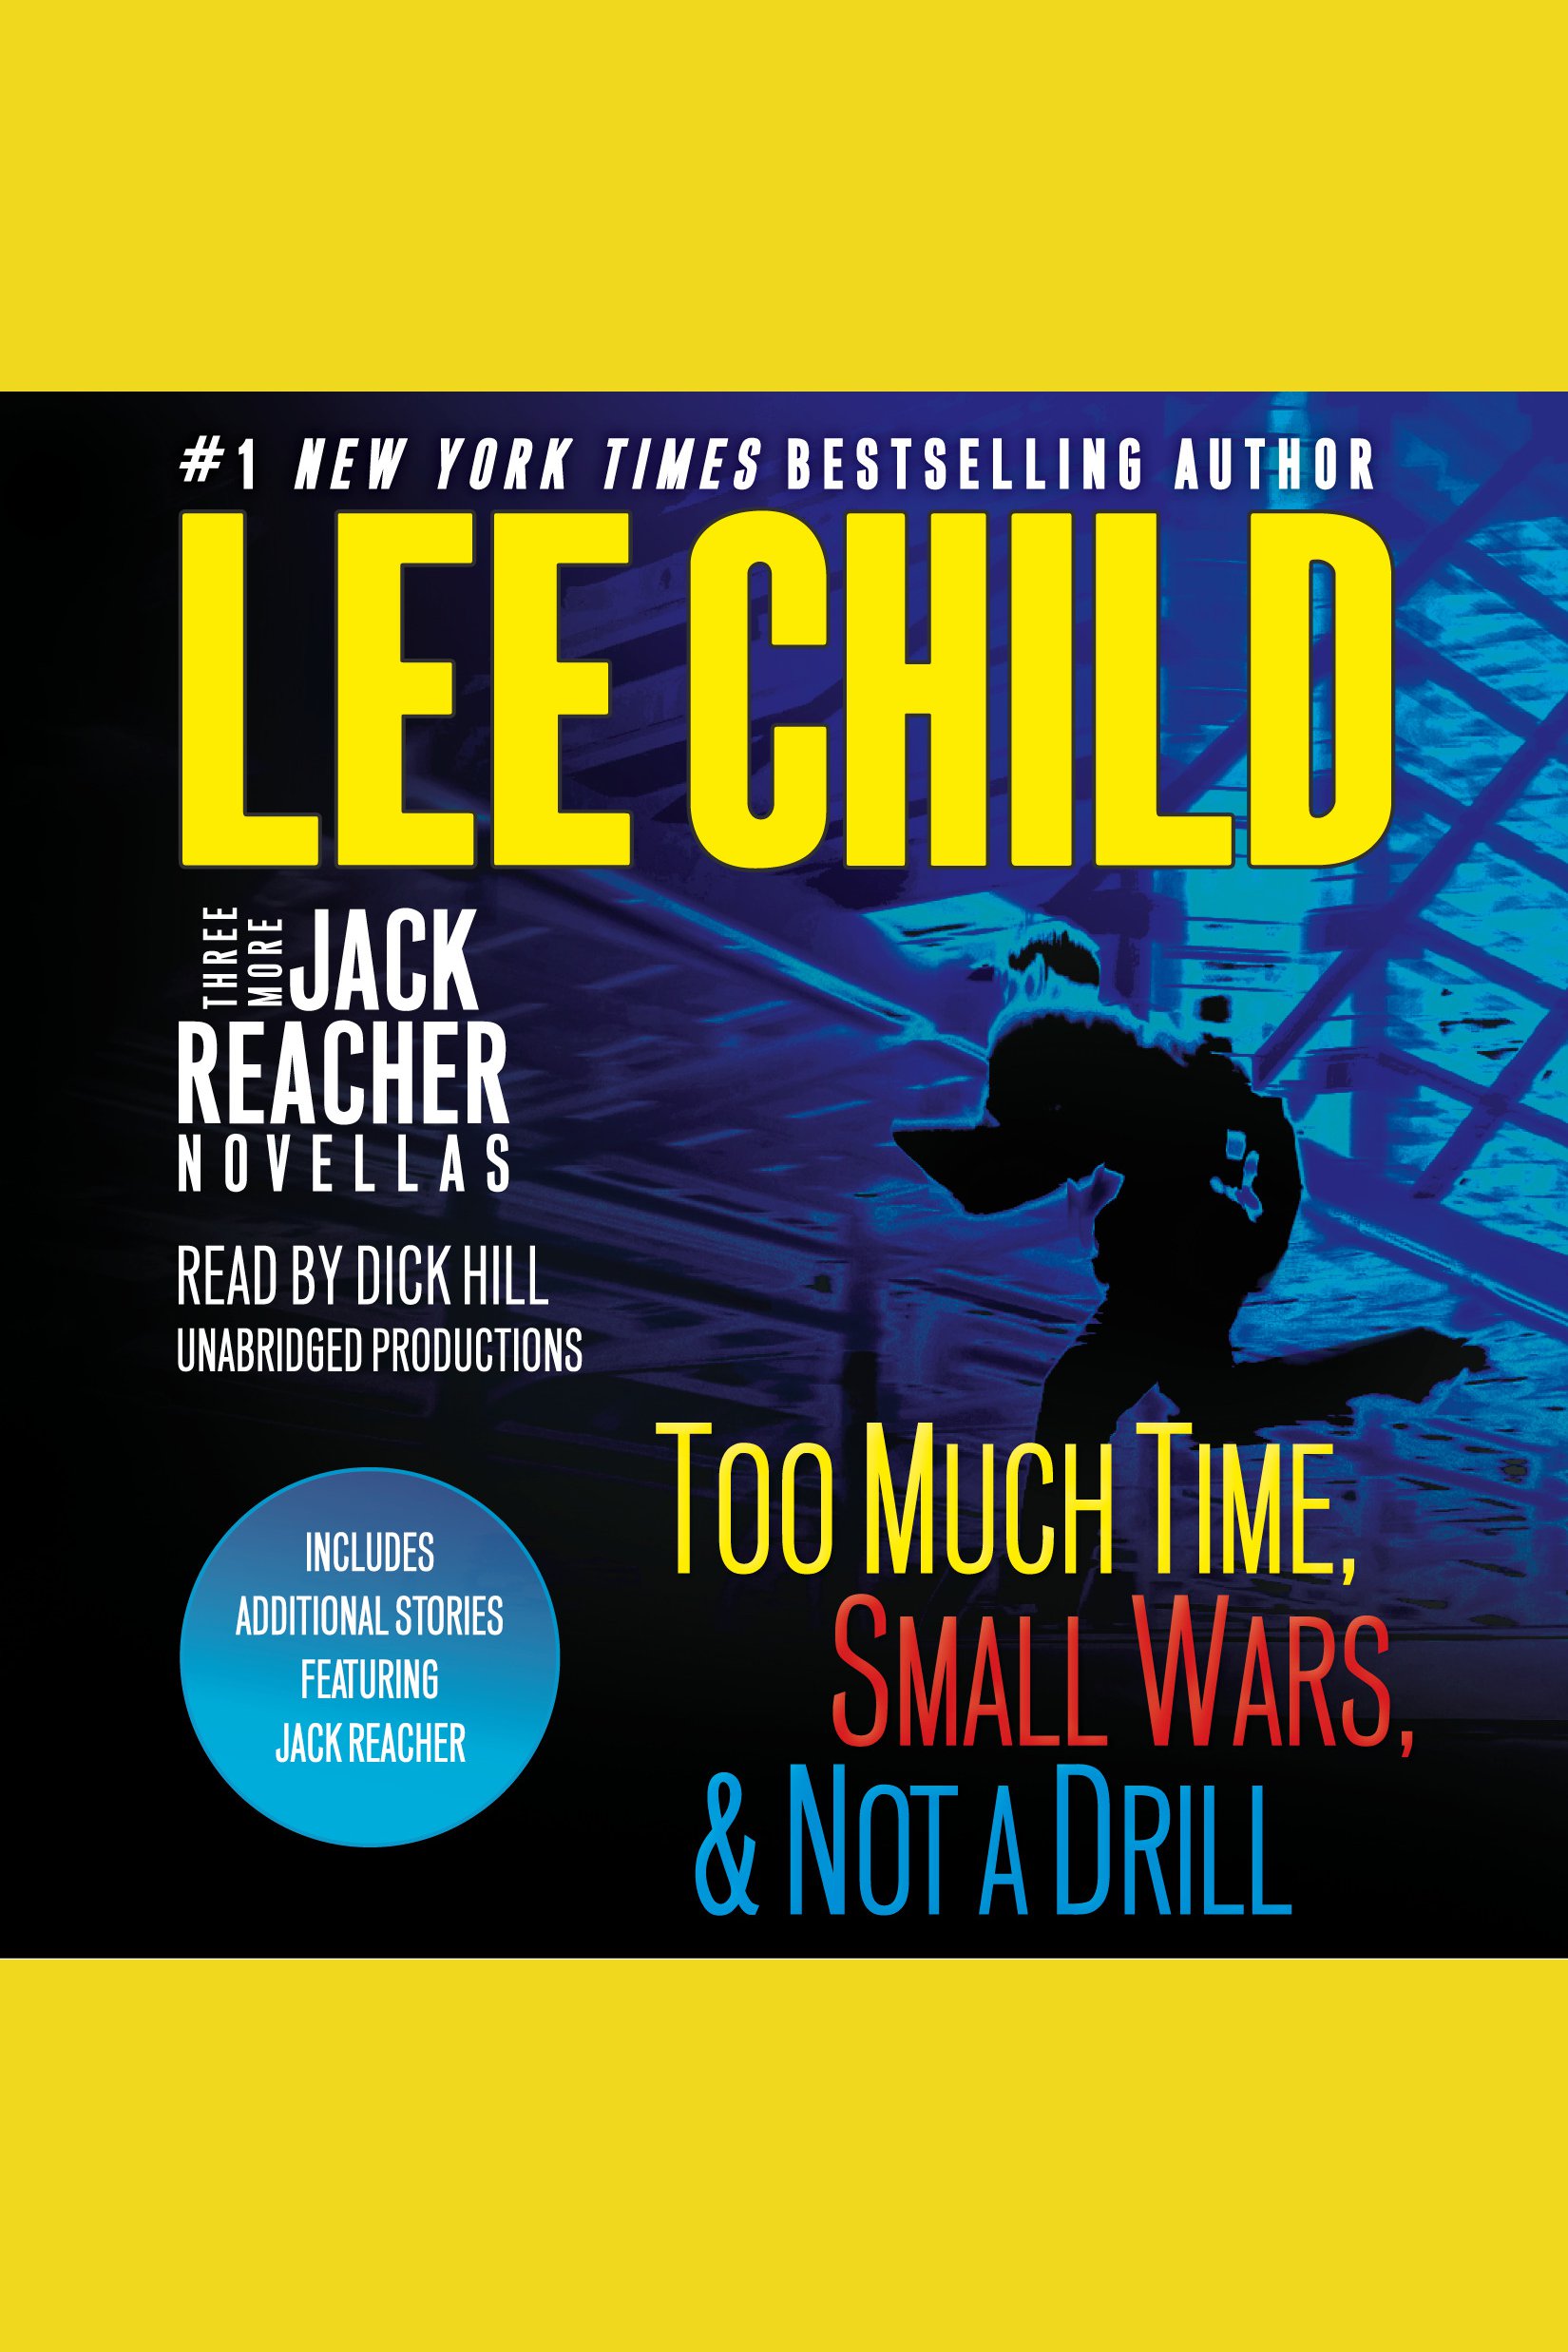 Image de couverture de Three More Jack Reacher Novellas [electronic resource] : Too Much Time, Small Wars, Not a Drill, Plus Additional Stories